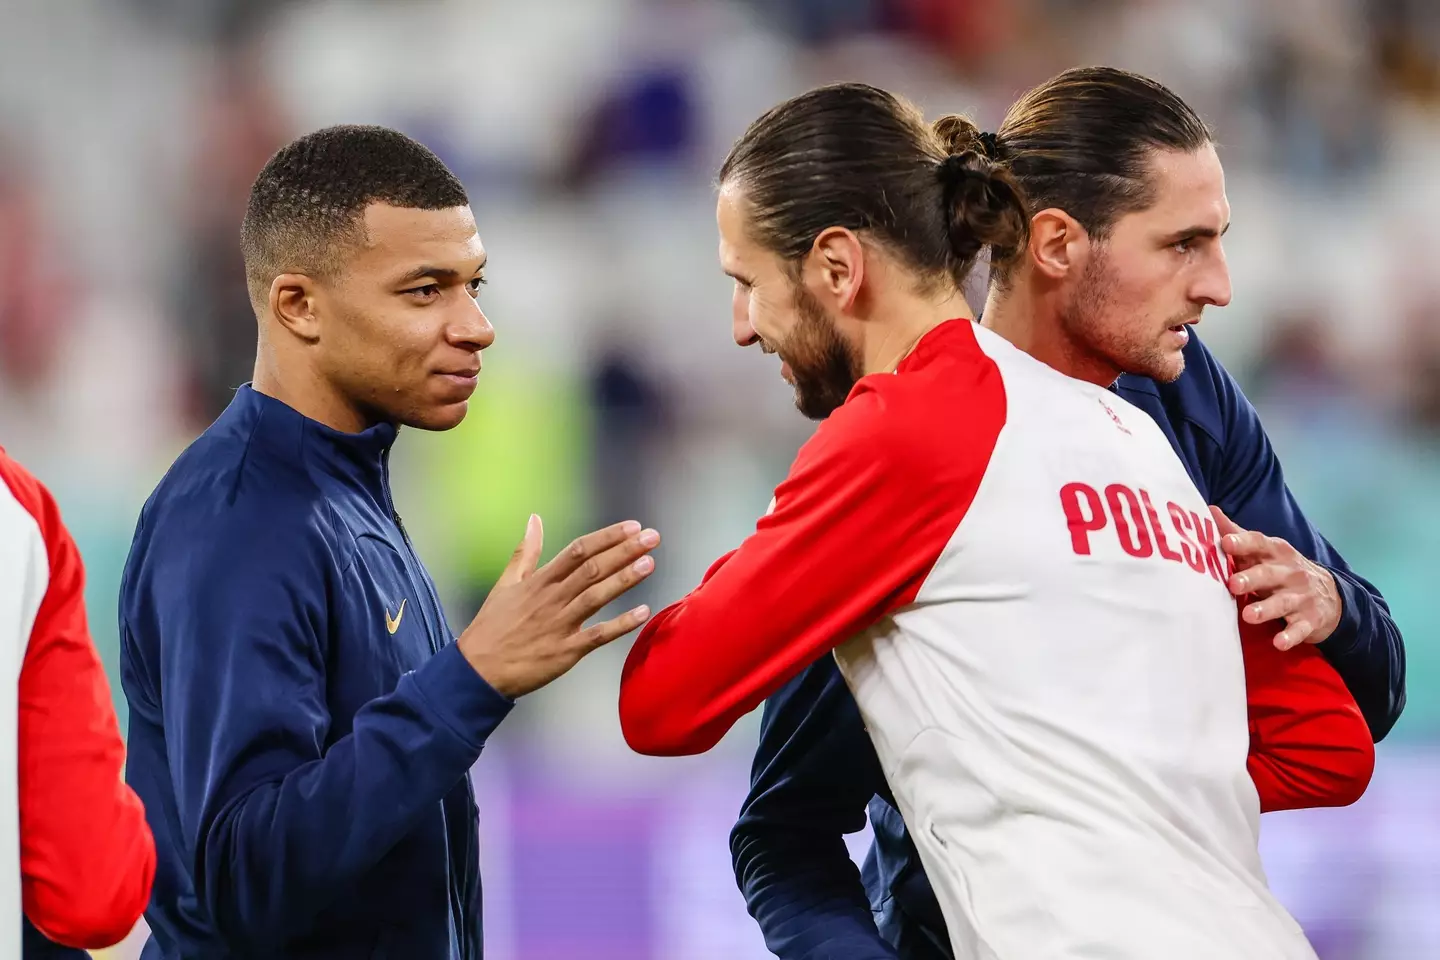 England assistant manager Steve Holland has hinted at a Jose Mourinho-style approach to nullify Kylian Mbappe.